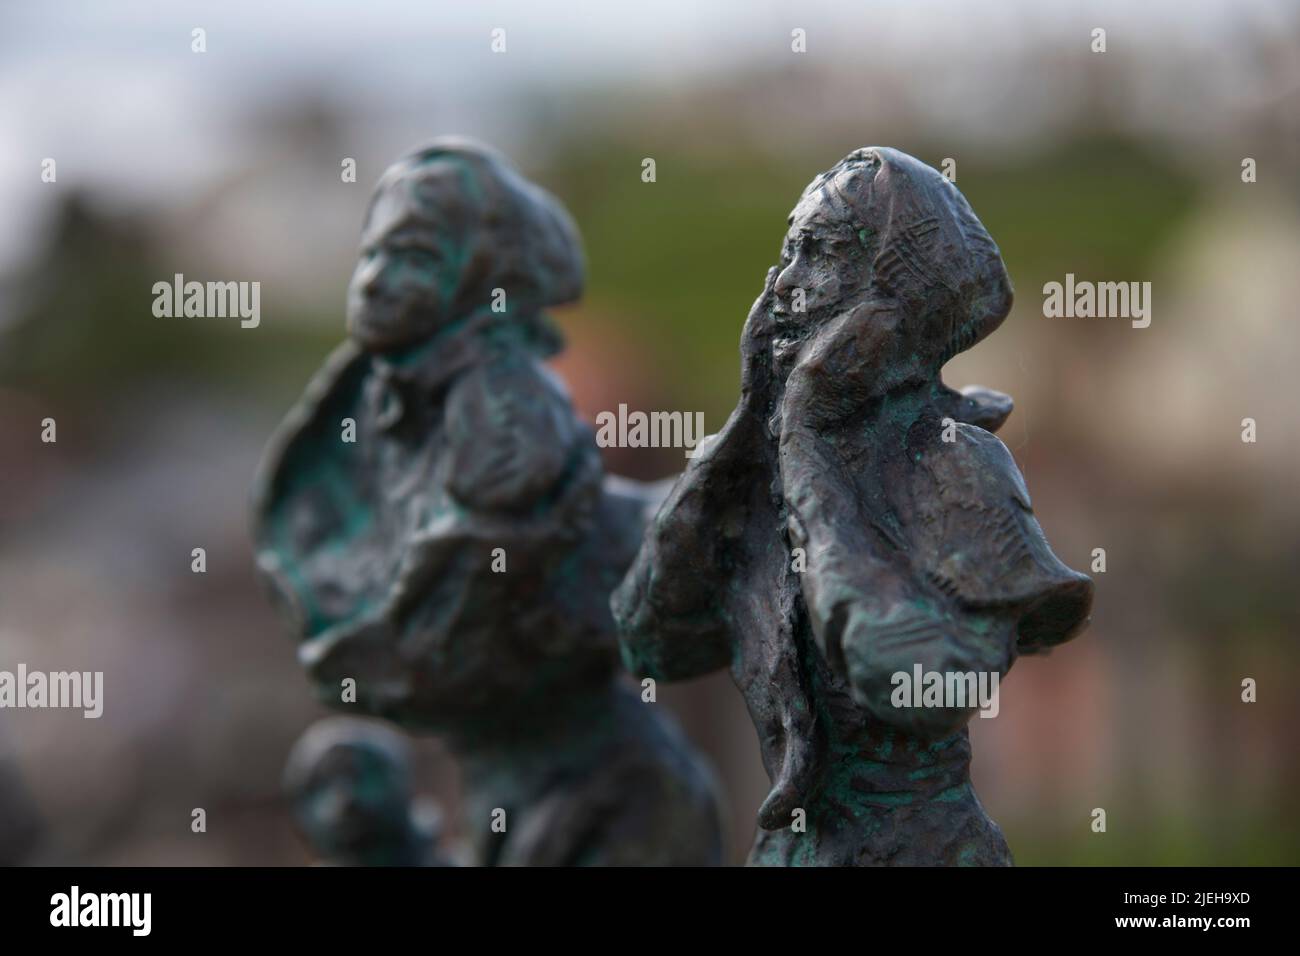 Widows & Bairns memorial to the fishermen lost and widows & bairns left behind in St Abbs in a storm 14th Oct 1881, St Abbs, Berwickshire, Scotland Stock Photo